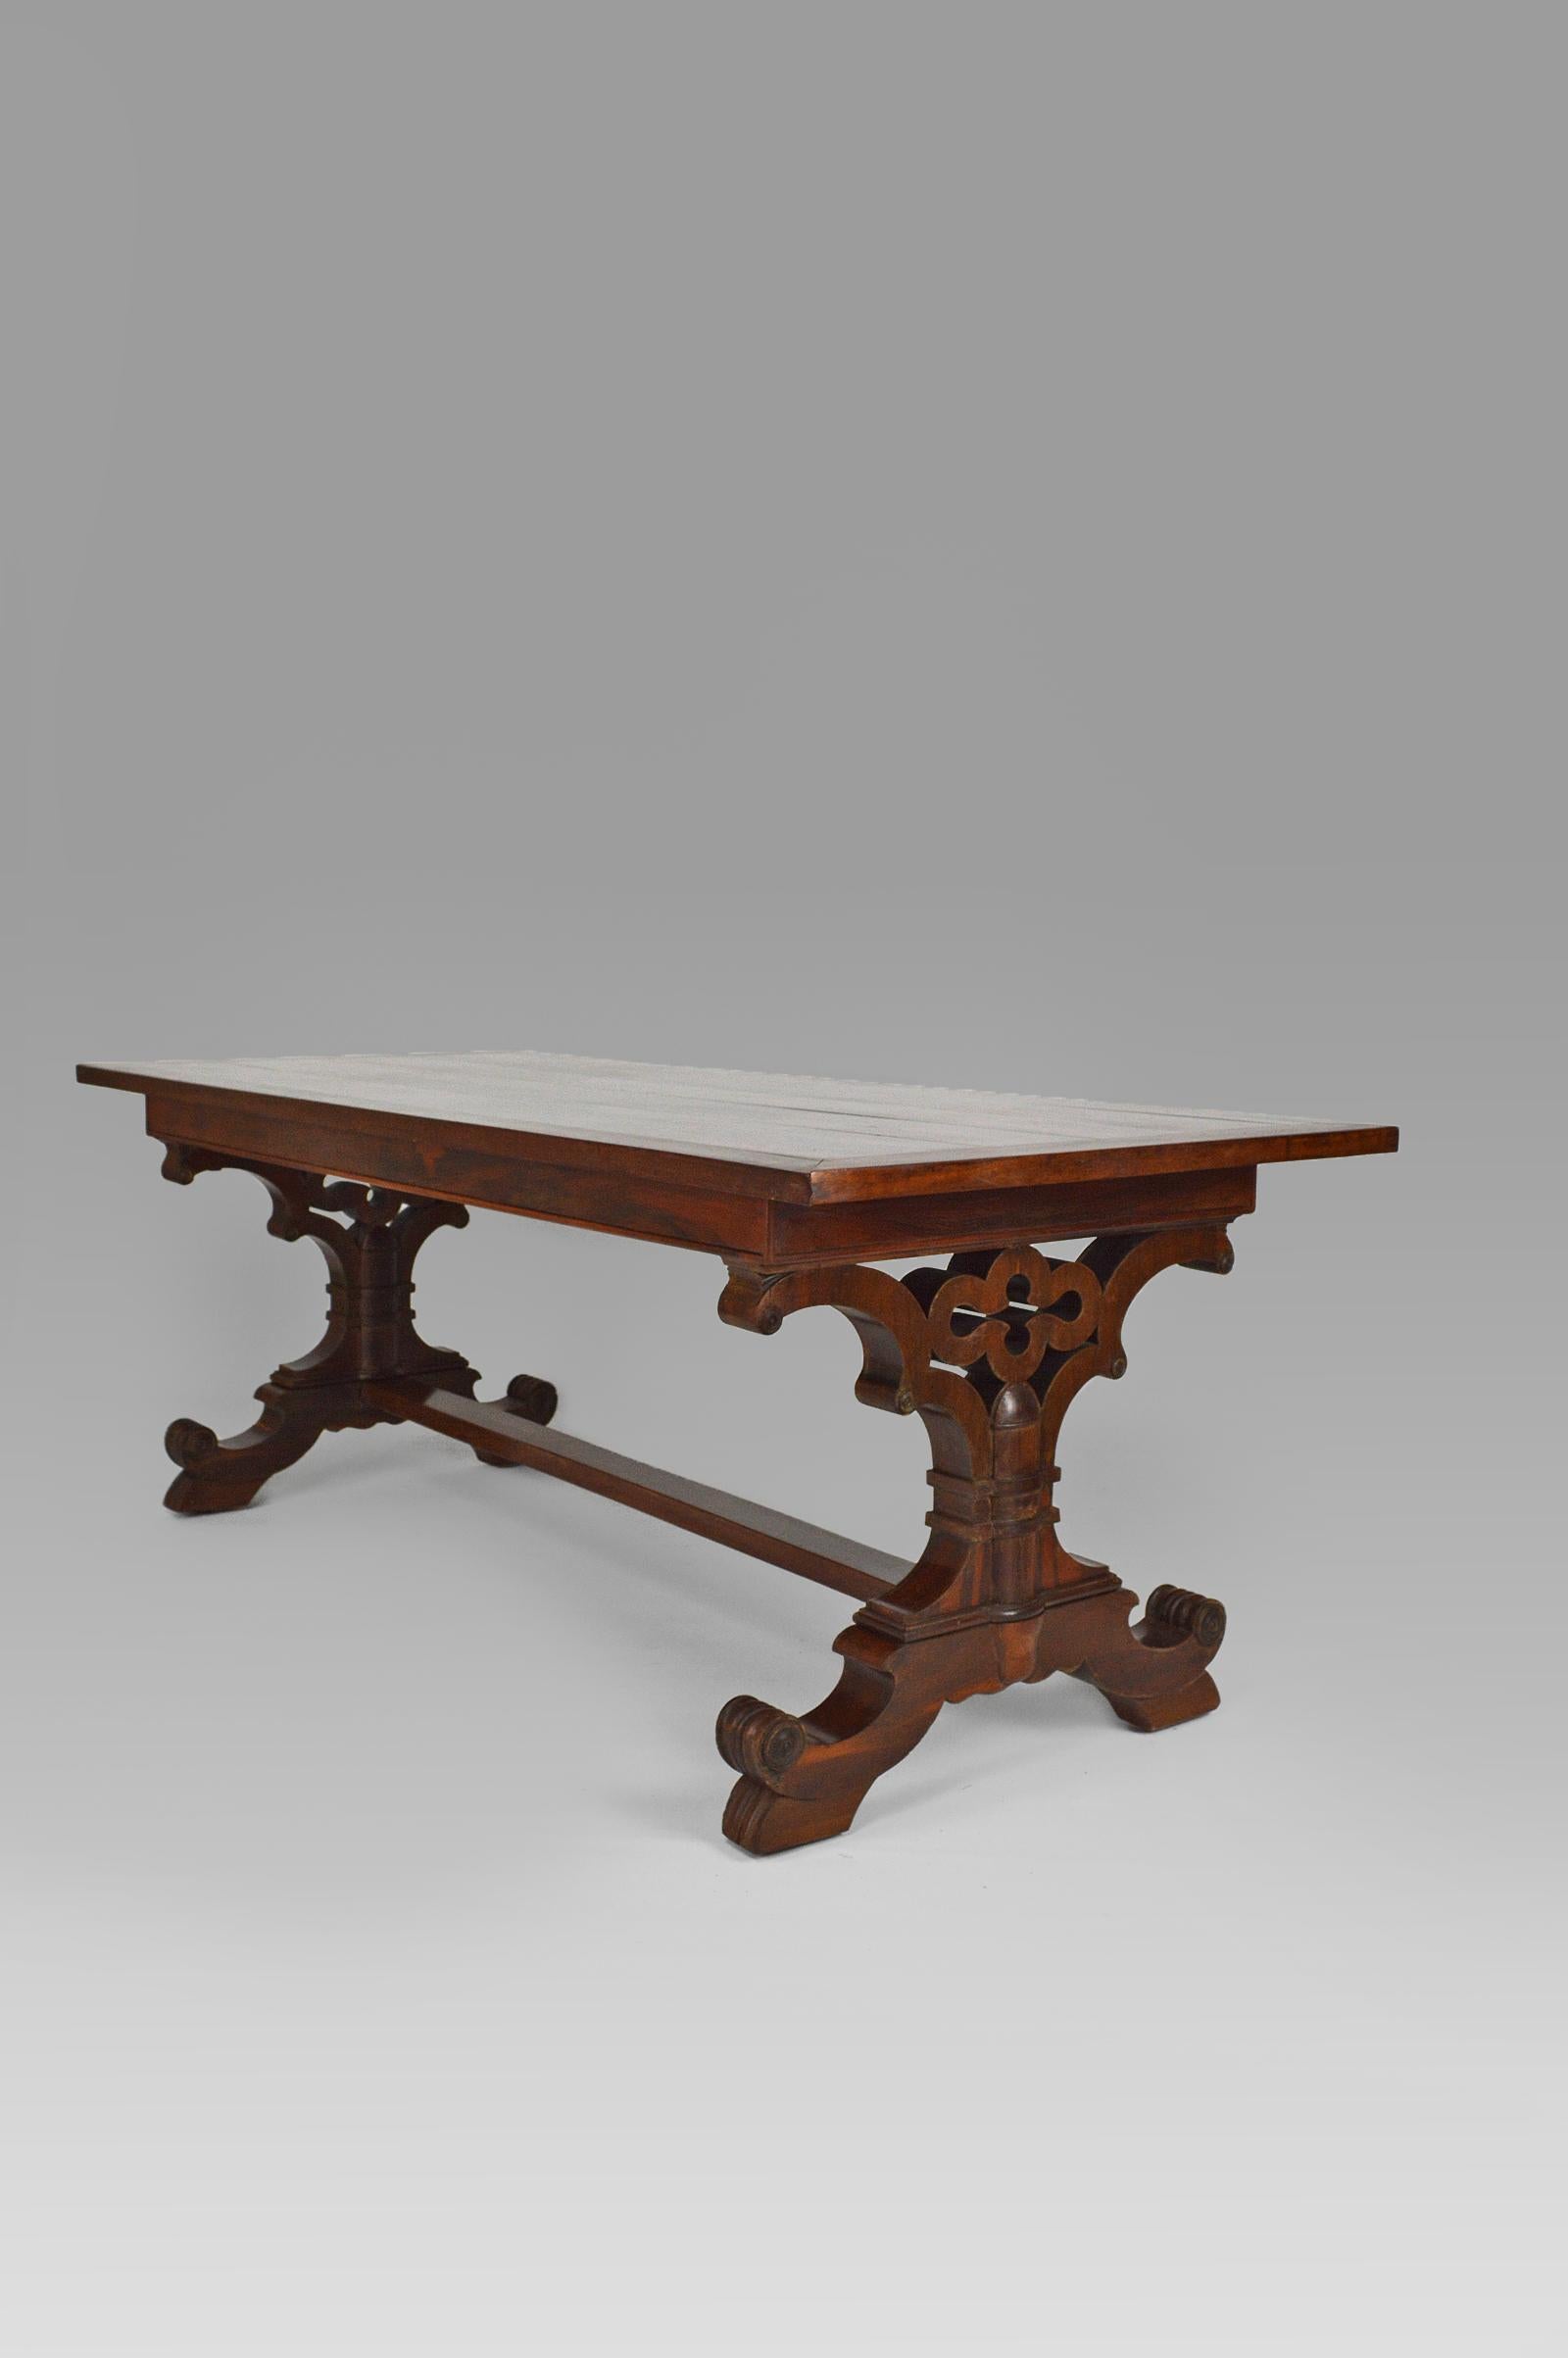 Gothic Revival Dining Table in Mahogany, Victorian Era, circa 1840 For Sale 4